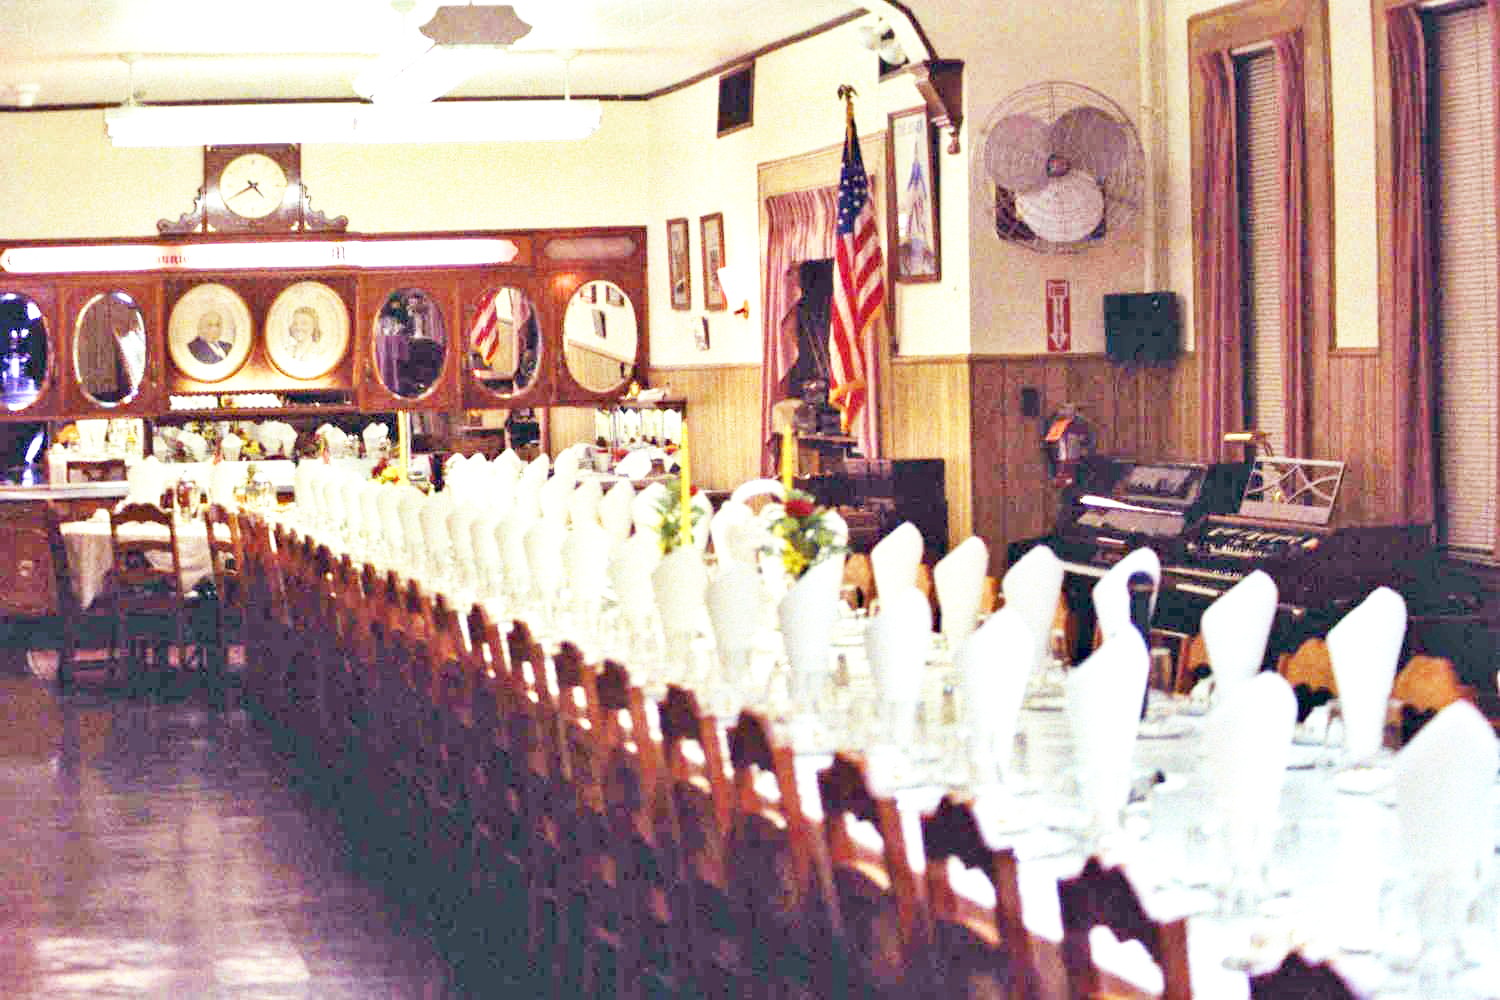 Holy Communion Banquet Table at The Circle Mission Church, Home and Training School, Inc., 
764-772 S. Broad Street, Philadelphia, Pennsylvania